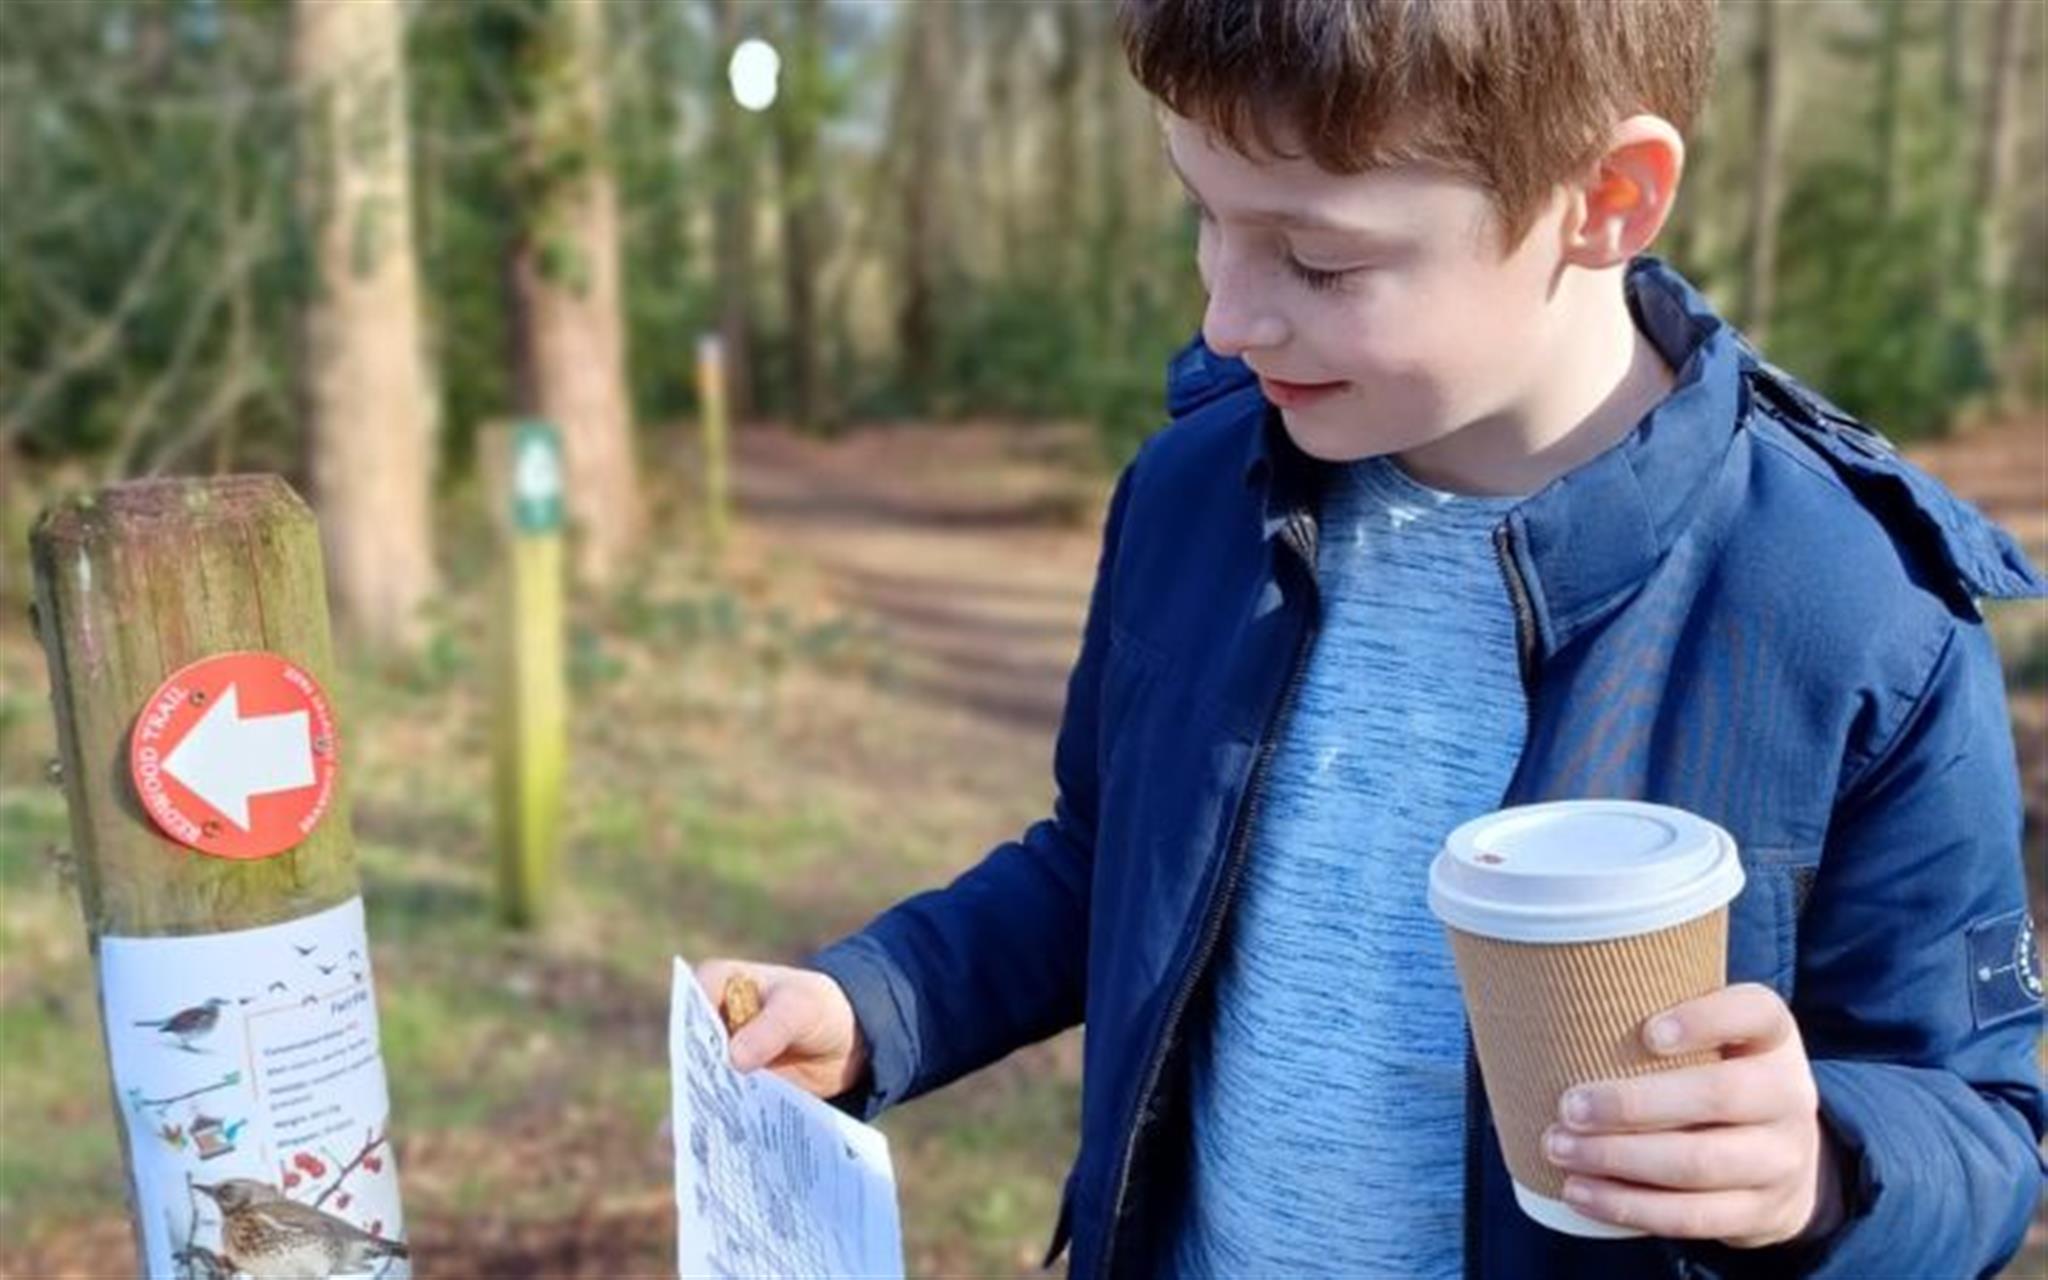 Brandon Country Park's Spring Holiday Trail